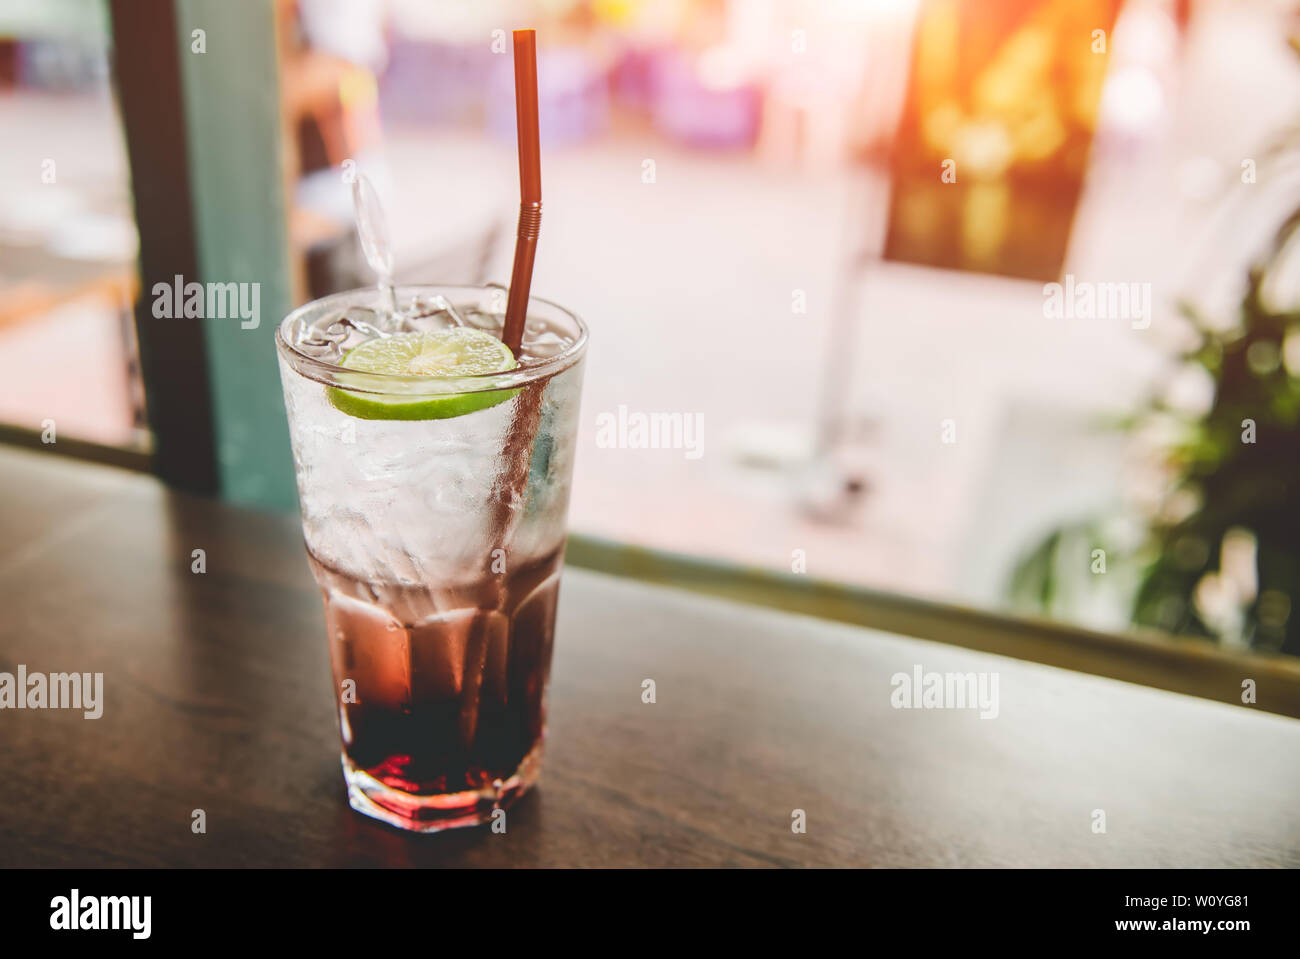 Ice and cold sweet soda drink with window low sun lighting. Stock Photo